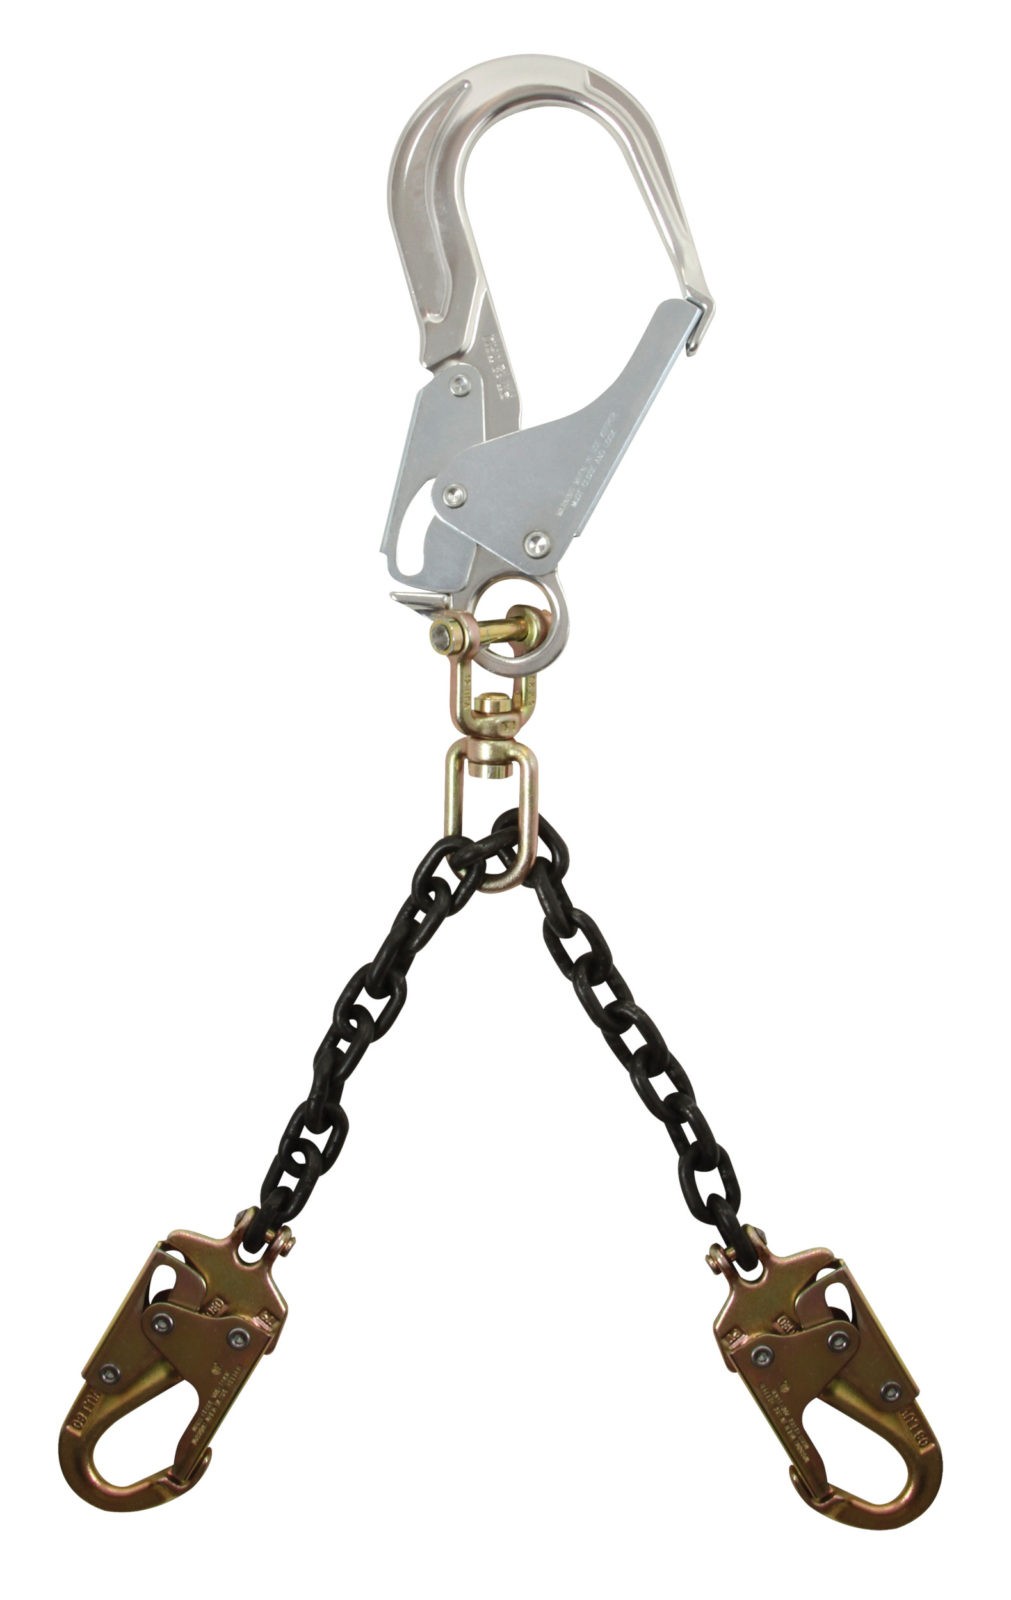 FallTech 8250A Aluminum Rebar Hook with Swivel and 2.5 Gate Opening  Clevis-pin Steel Snap Hooks Grade 80 Chain